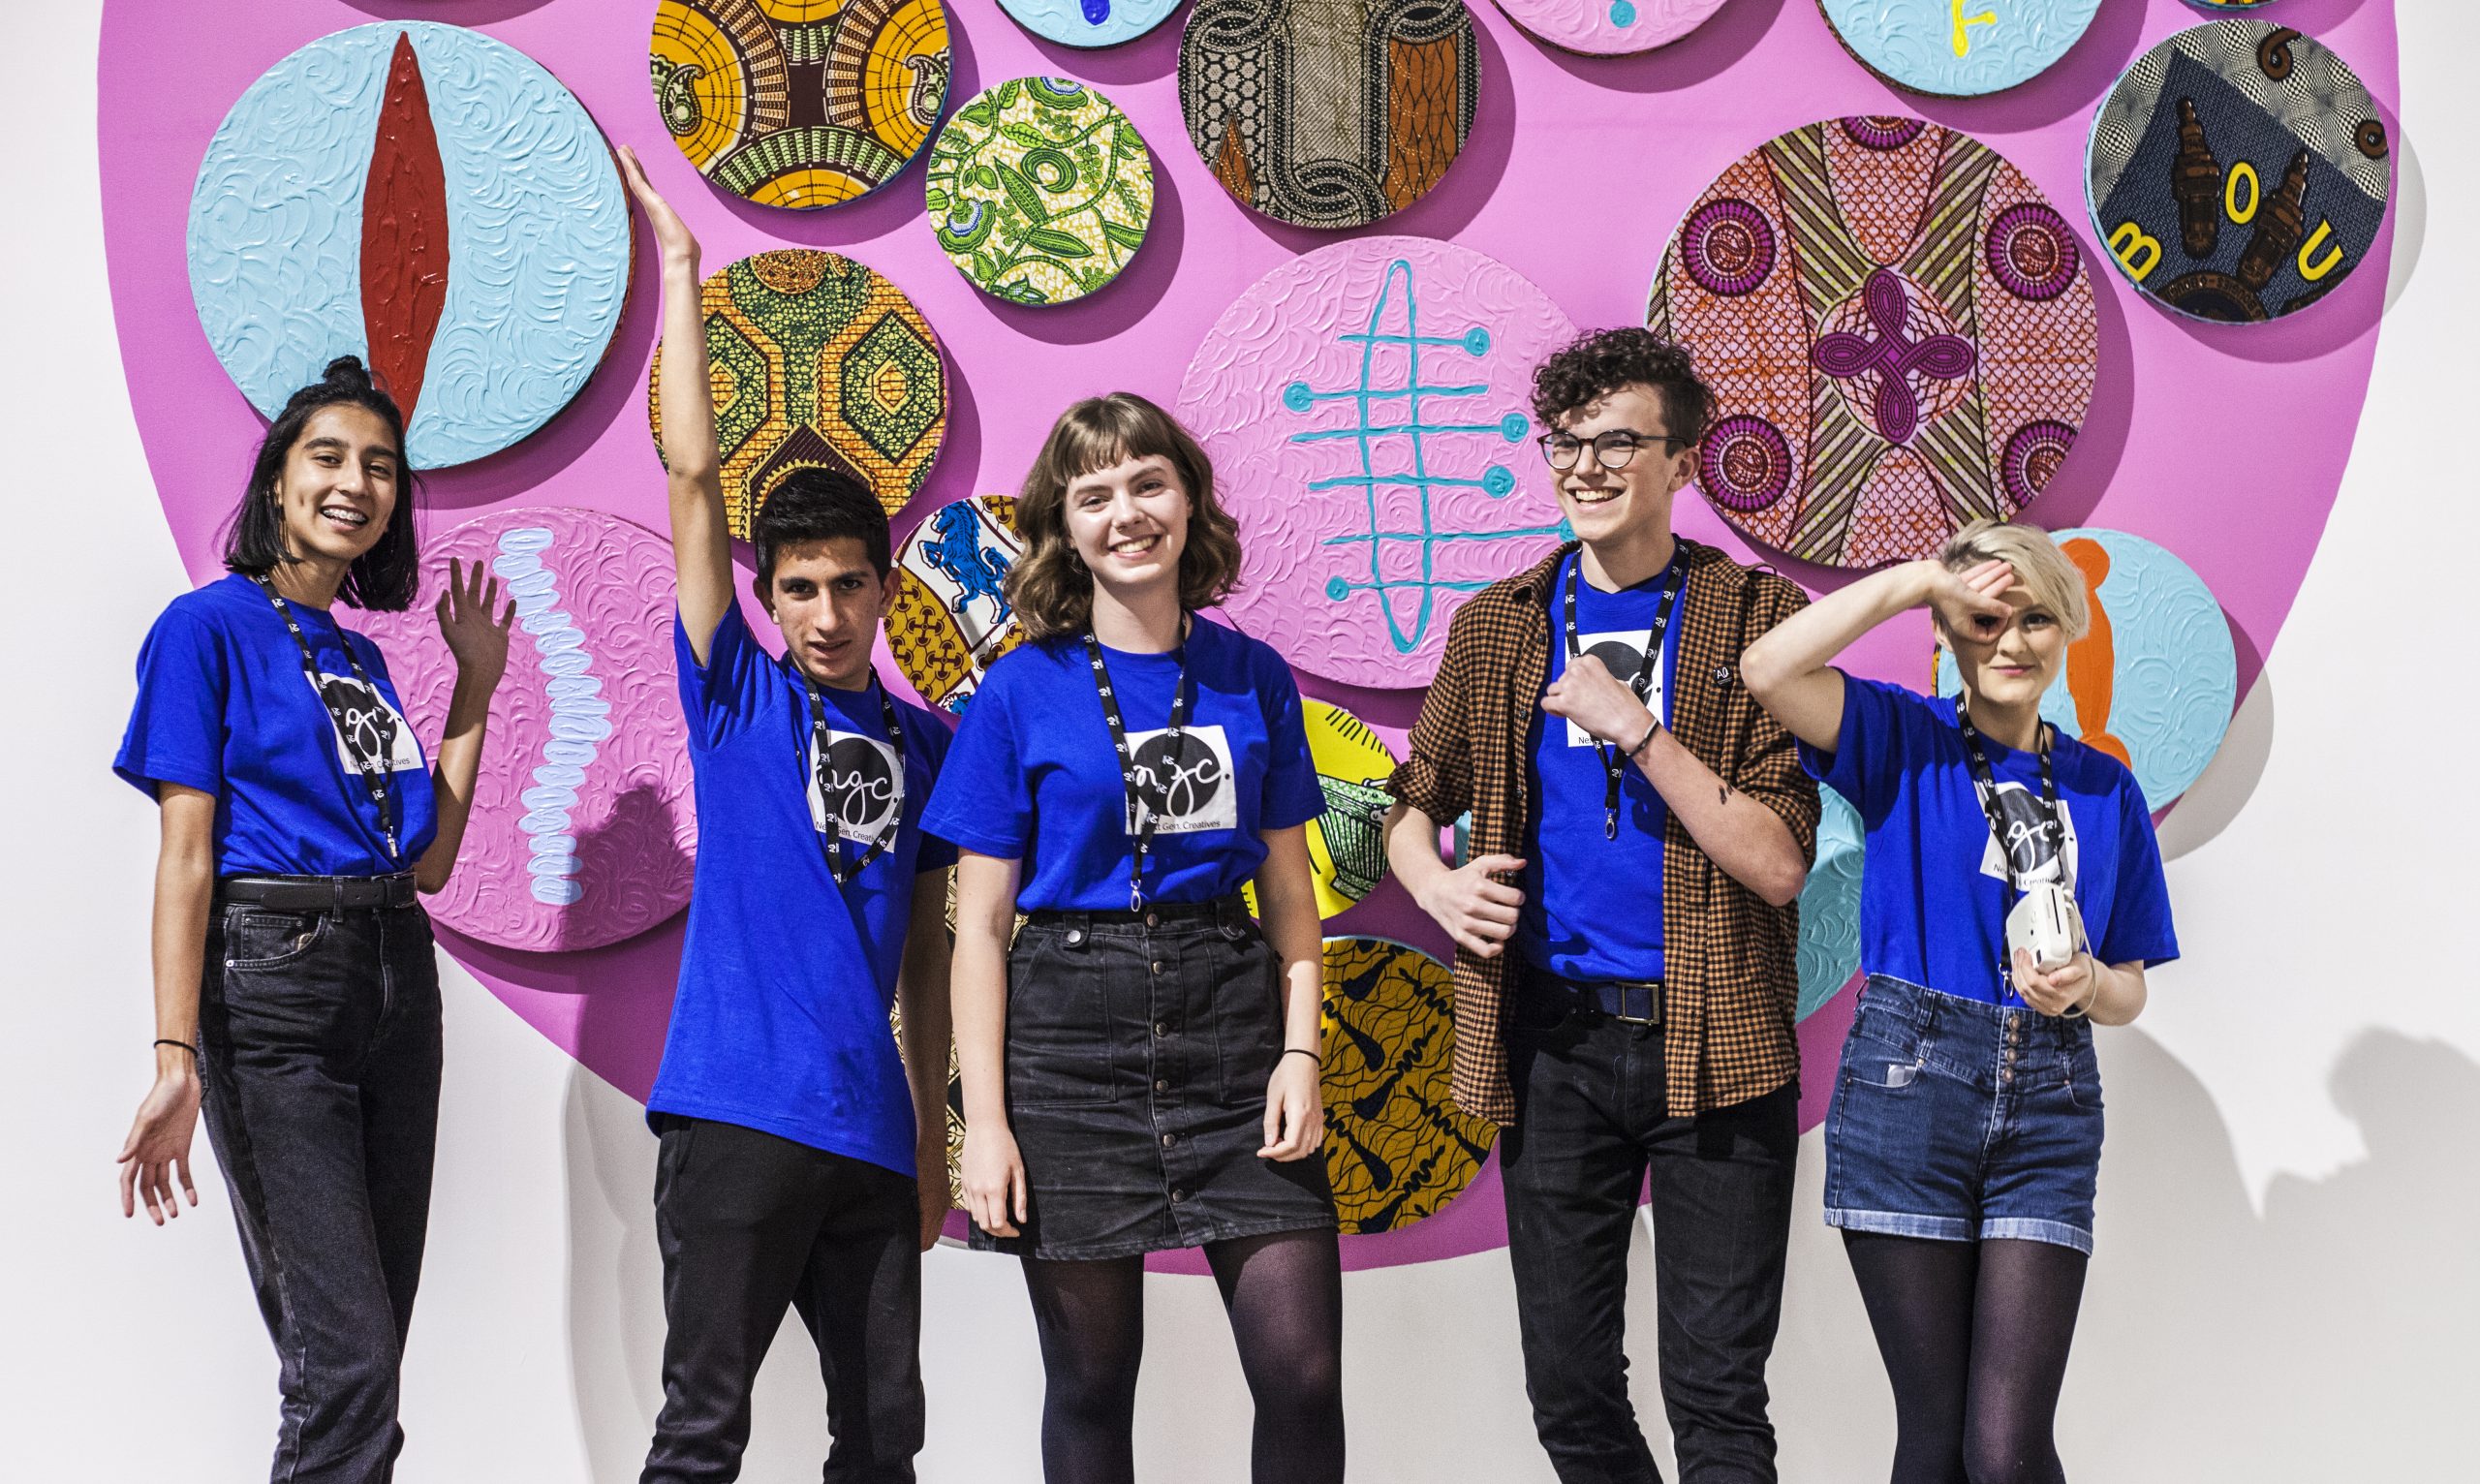 Five smiling people in blue t-shirts posing in front of a pink circle of artworks on a white wall.